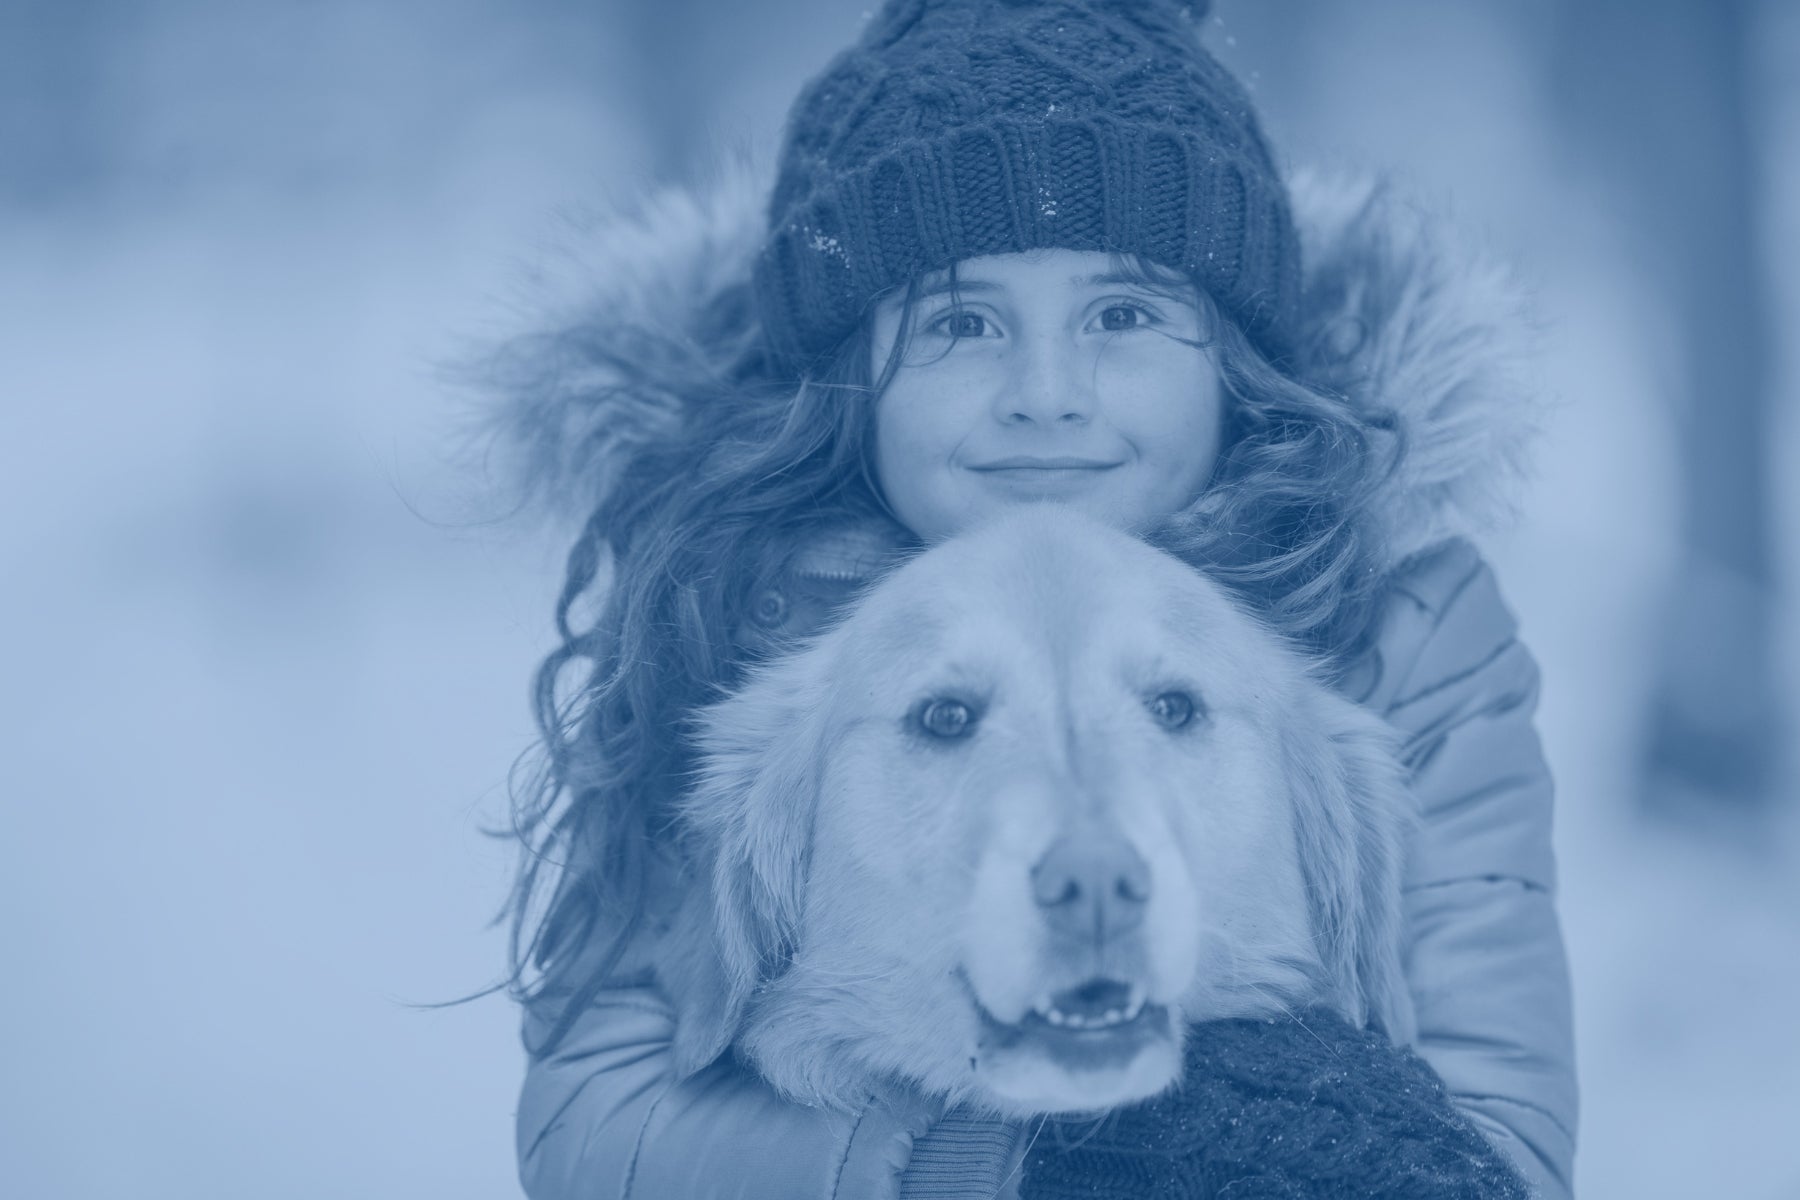 Winter Safety Tips for Pets: Keeping Your Best Friend Safe and Happy